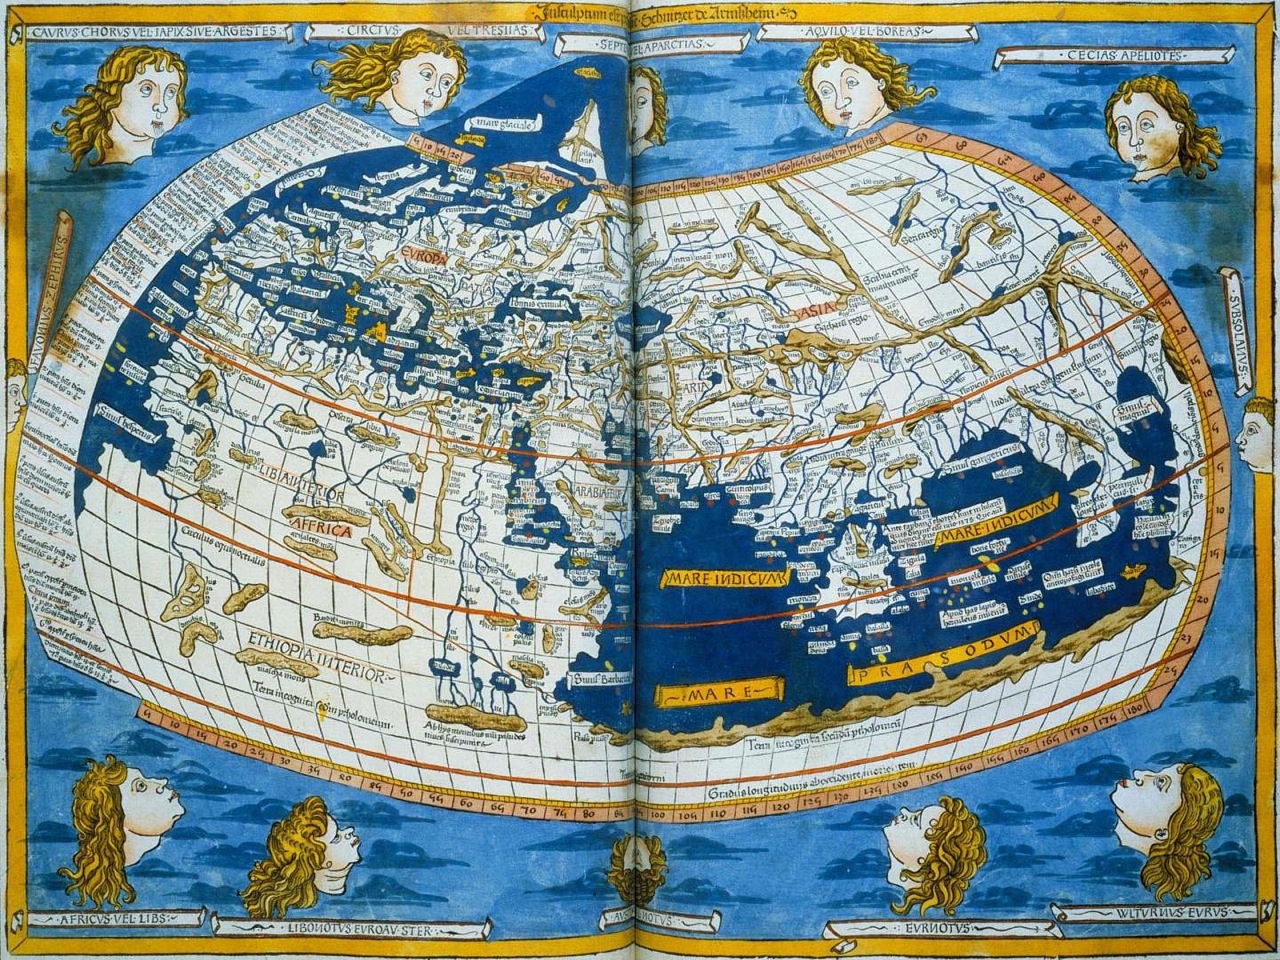 Ptolemy, a map of the known world.